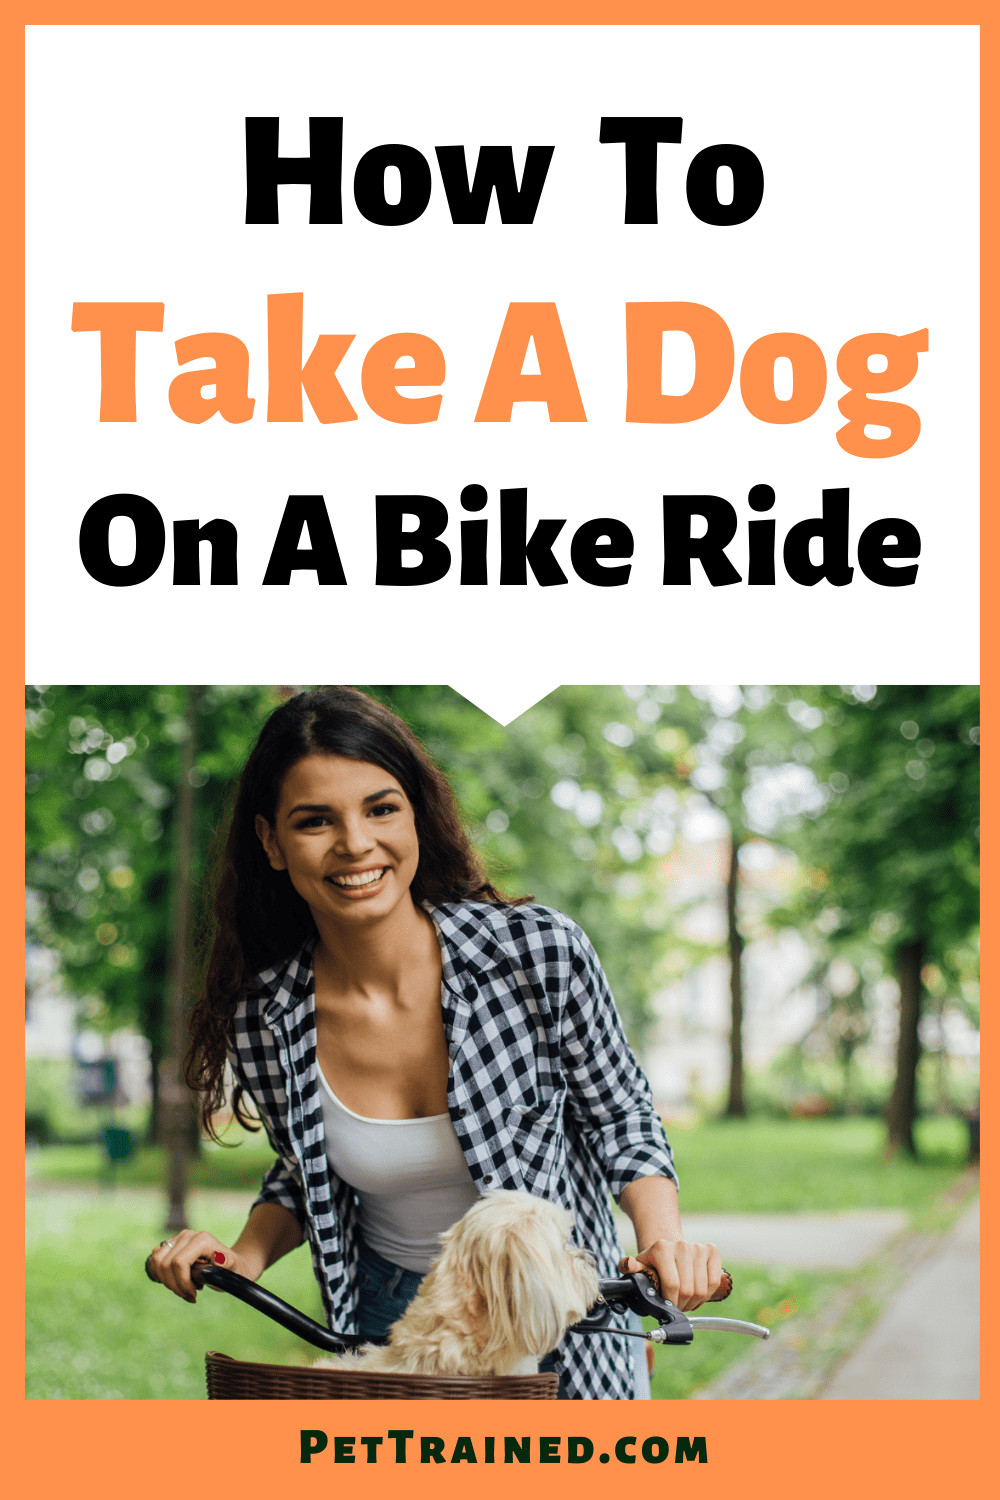 How to take a dog bike riding today